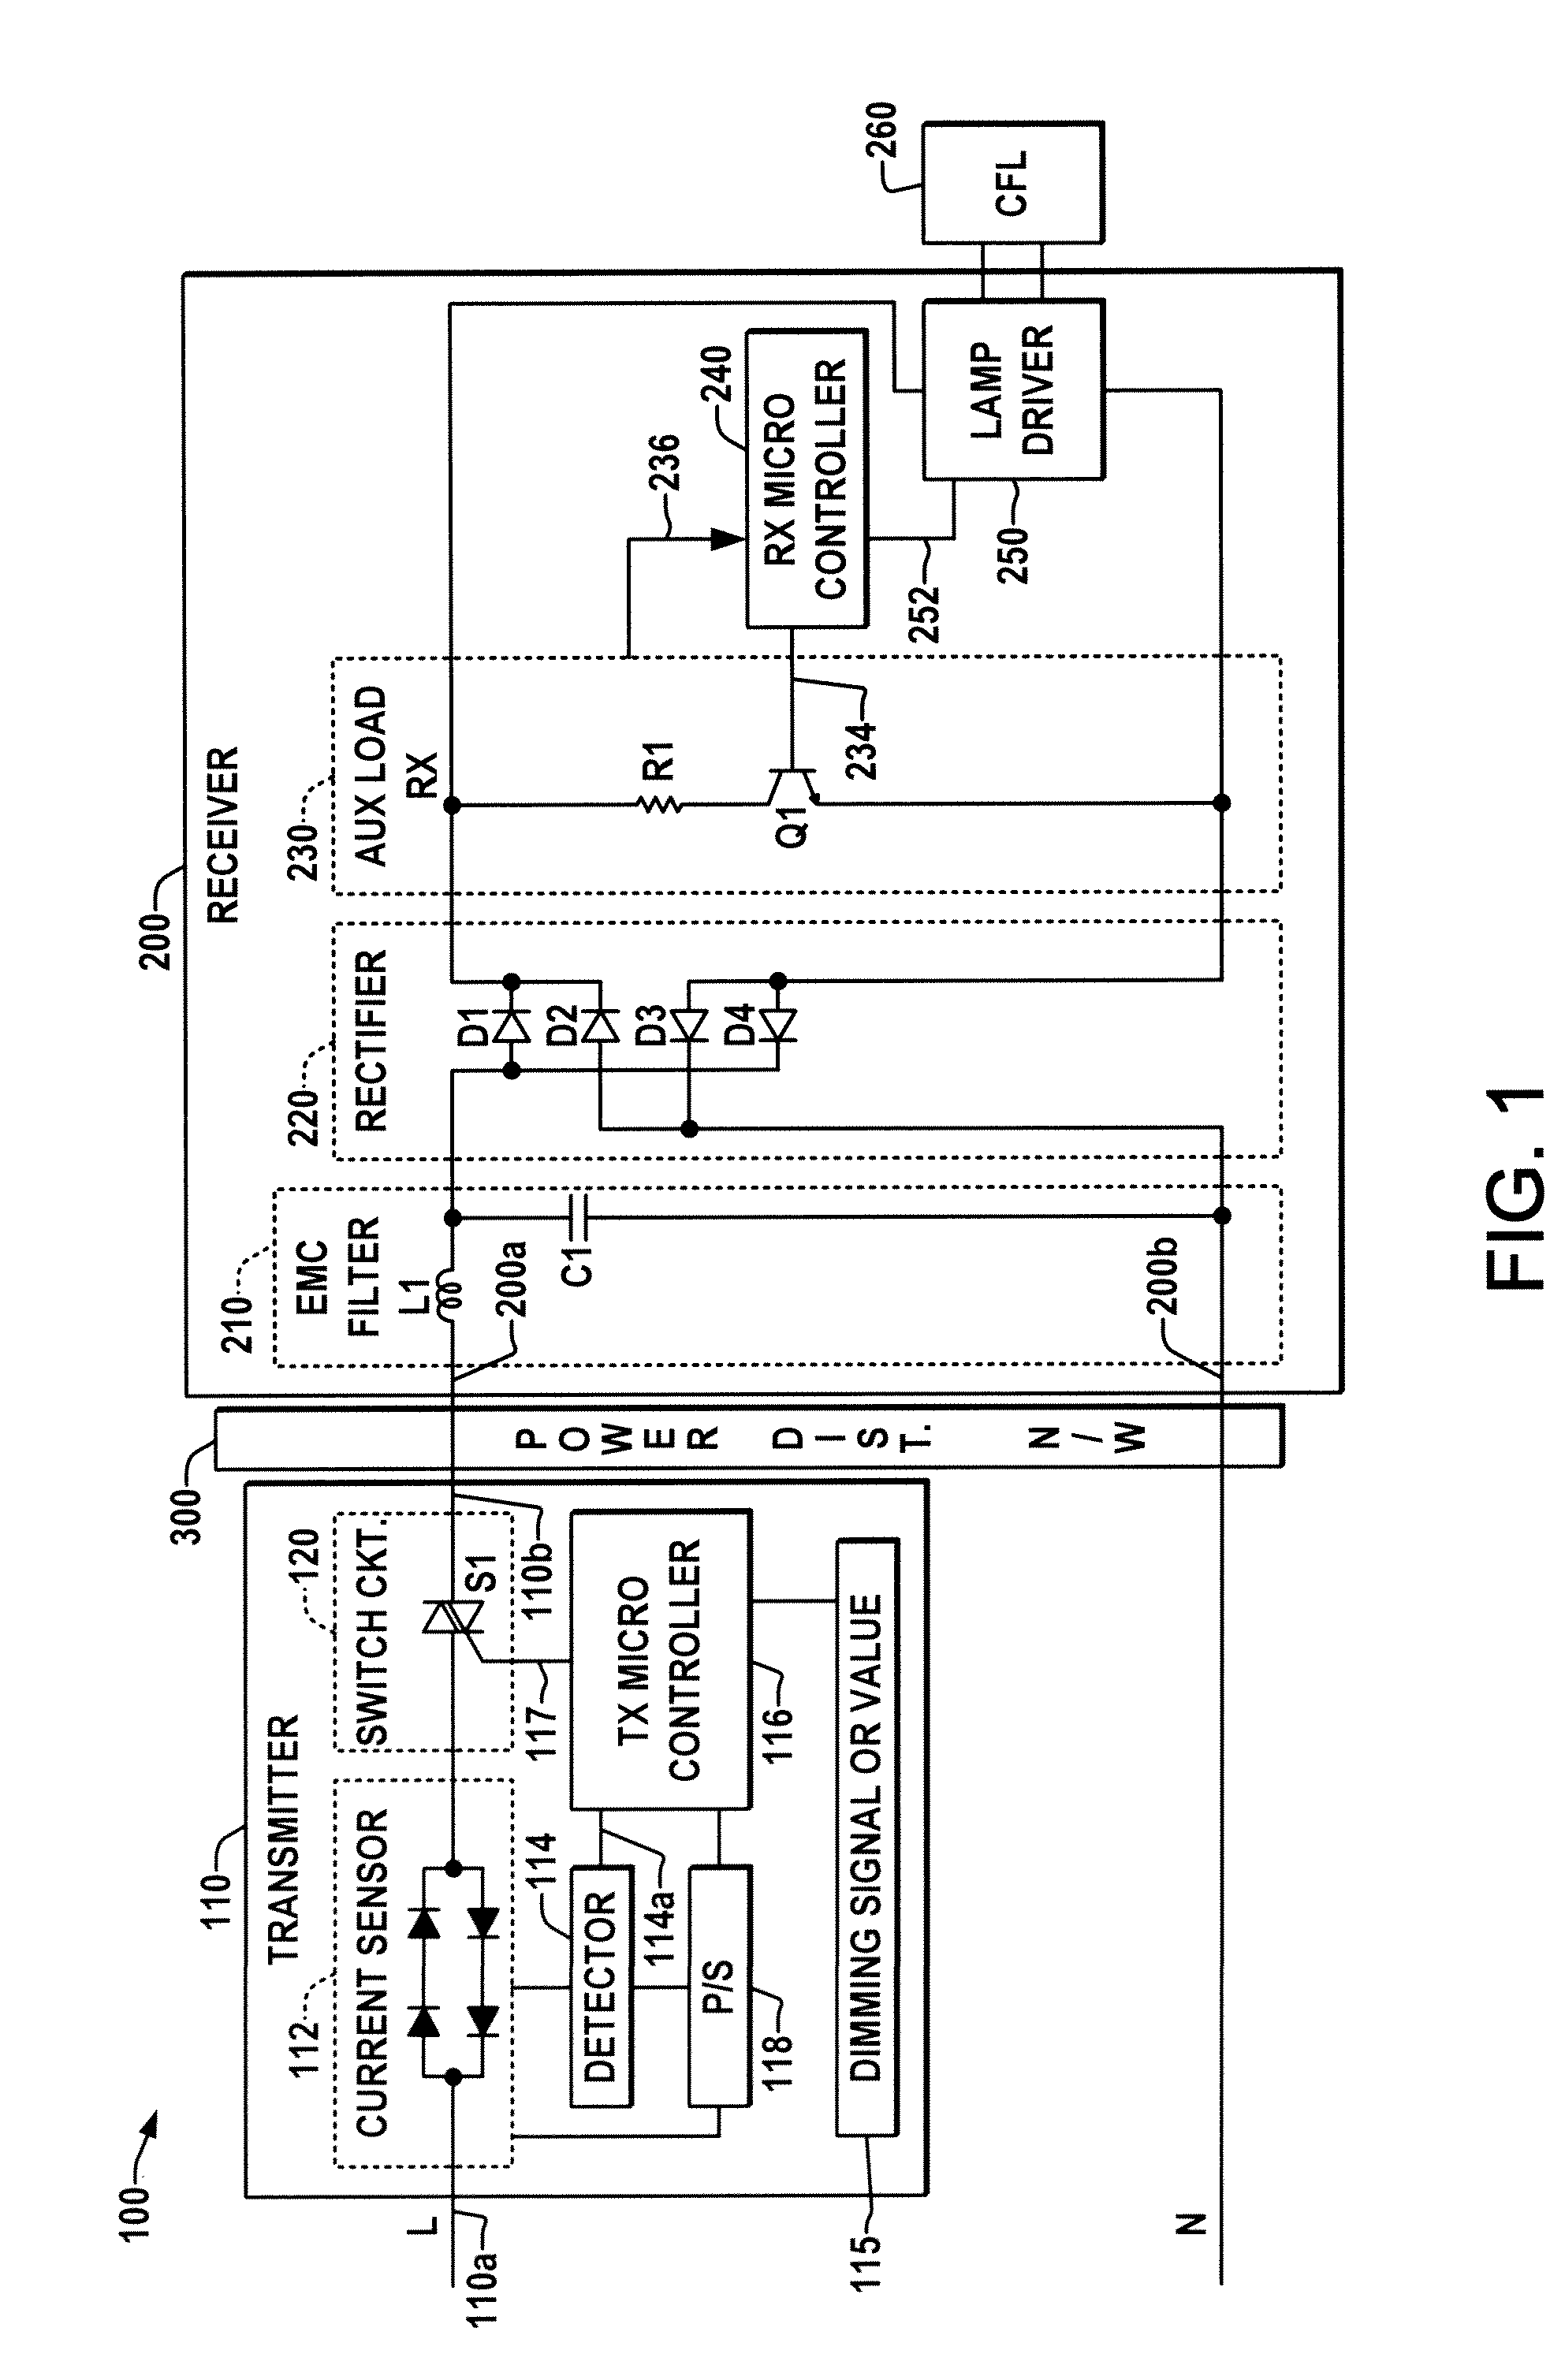 Apparatus for controlling integrated lighting ballasts in a series scheme